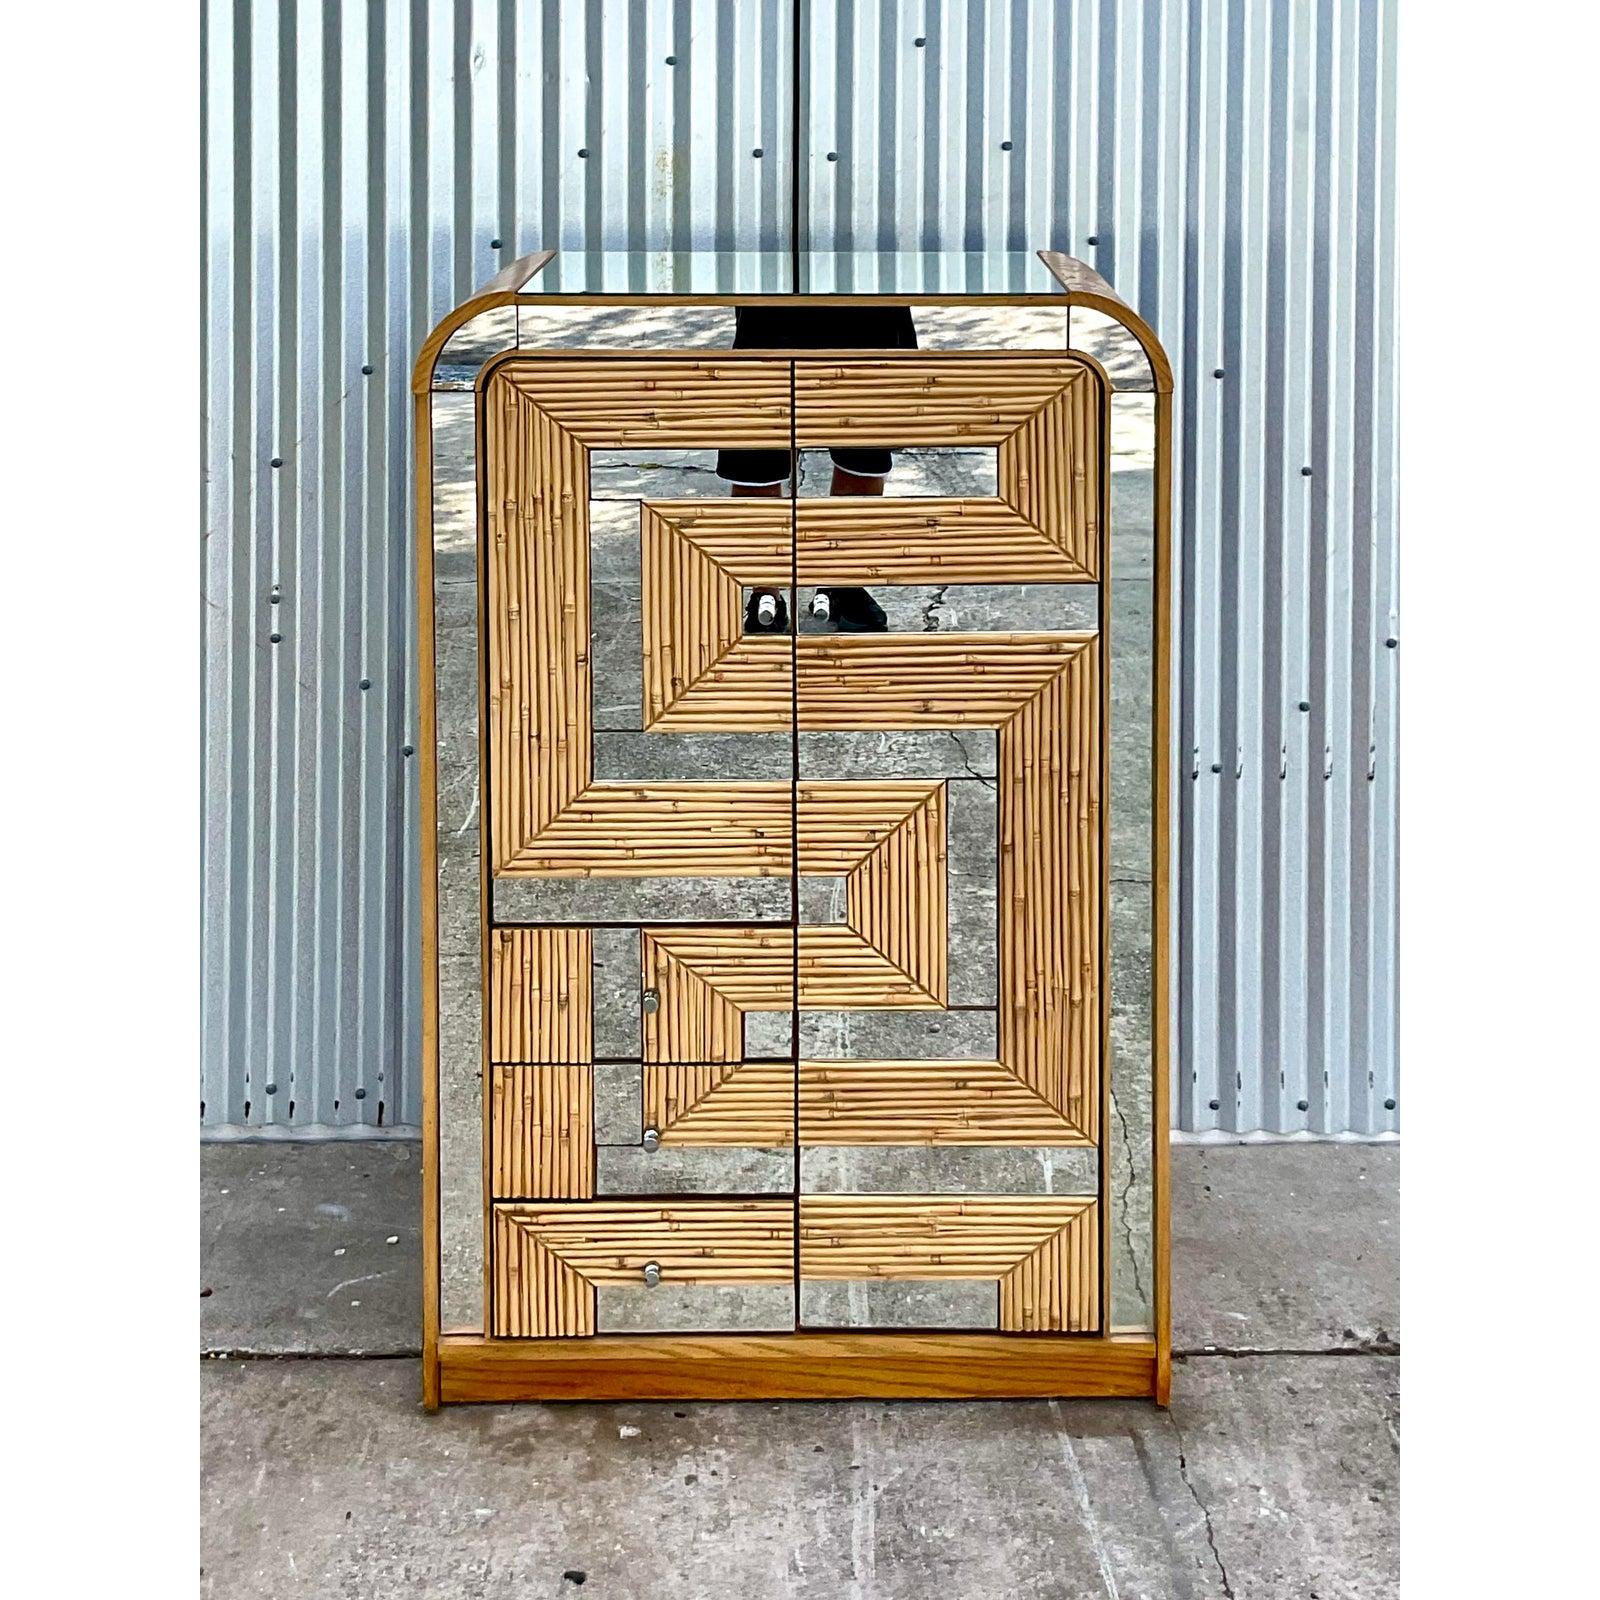 Fantastic vintage Coastal armoire. Beautiful split reed panels with a fab mirrored maze front. Lots of drawers and cabinets for storage. Acquired from a Palm Beach estate.